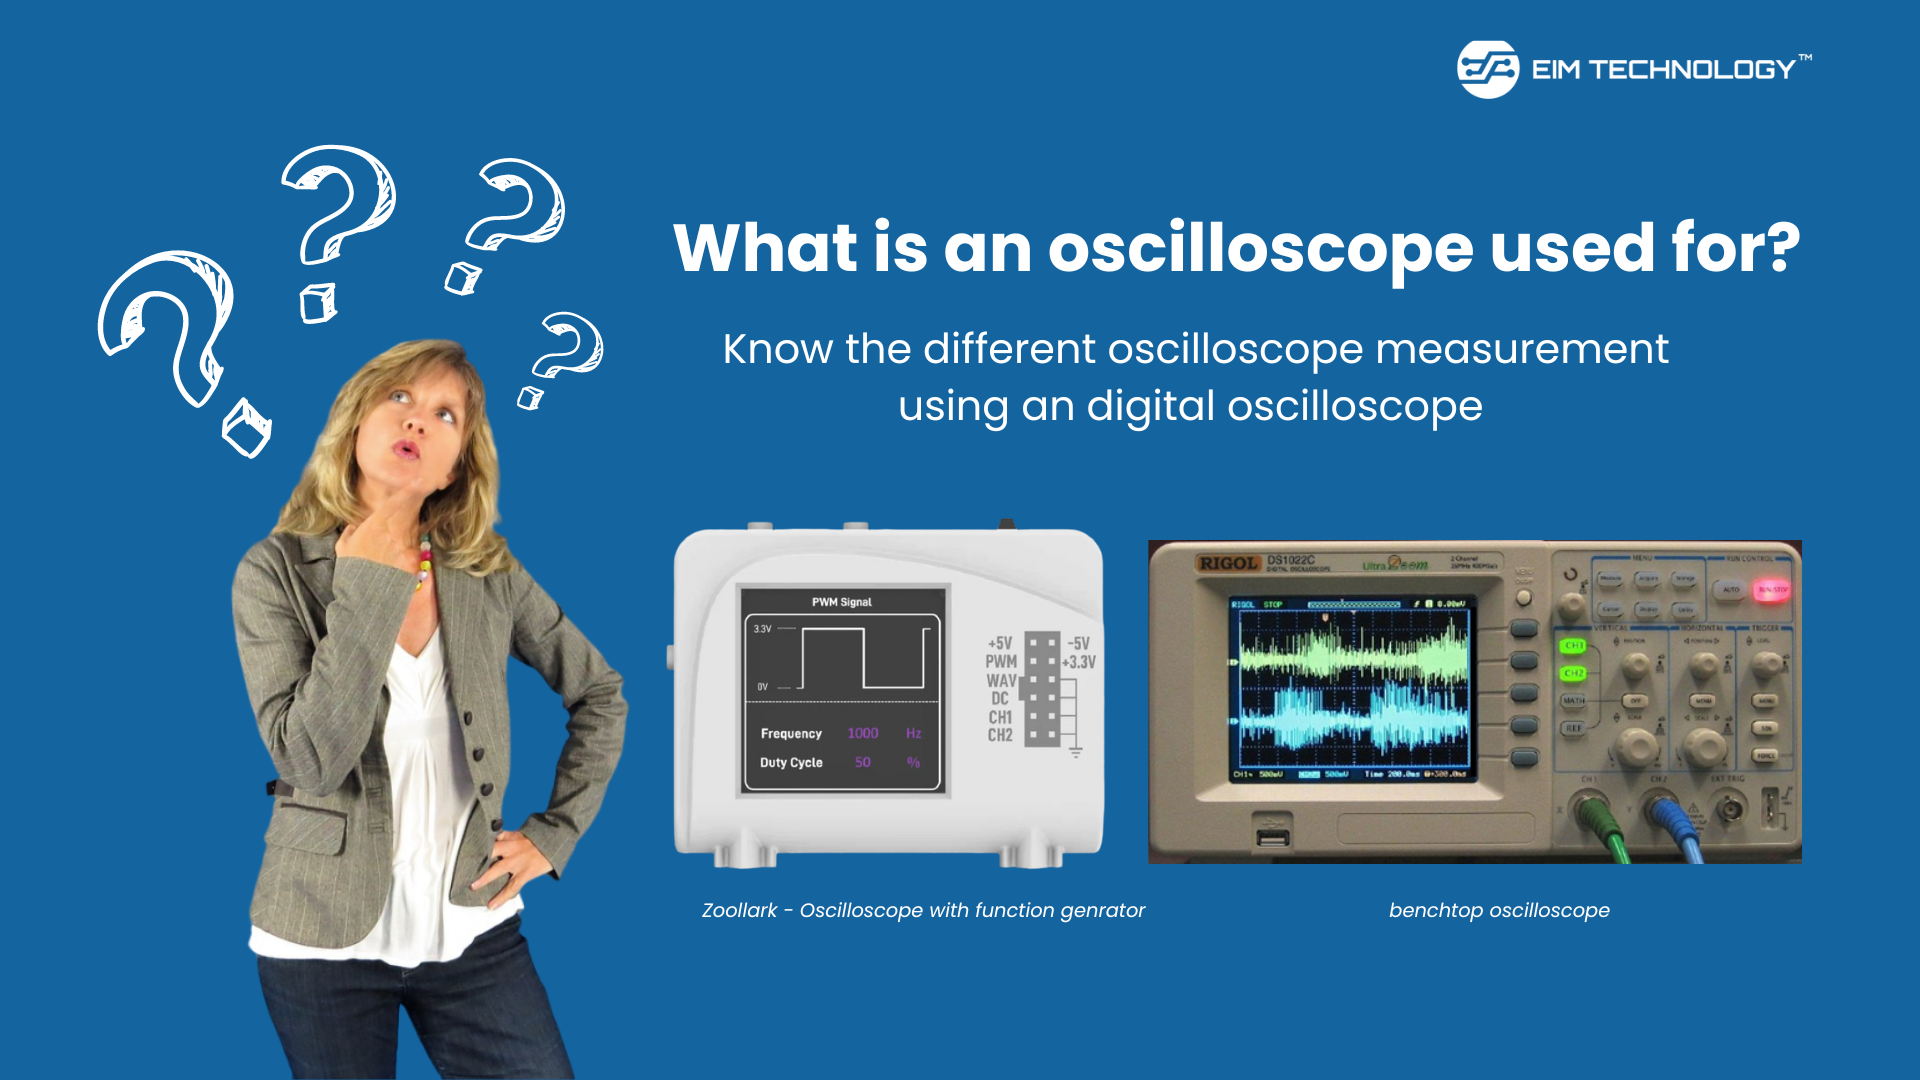 What is an oscilloscope used for? Know the different oscilloscope measurement using a digital oscilloscope